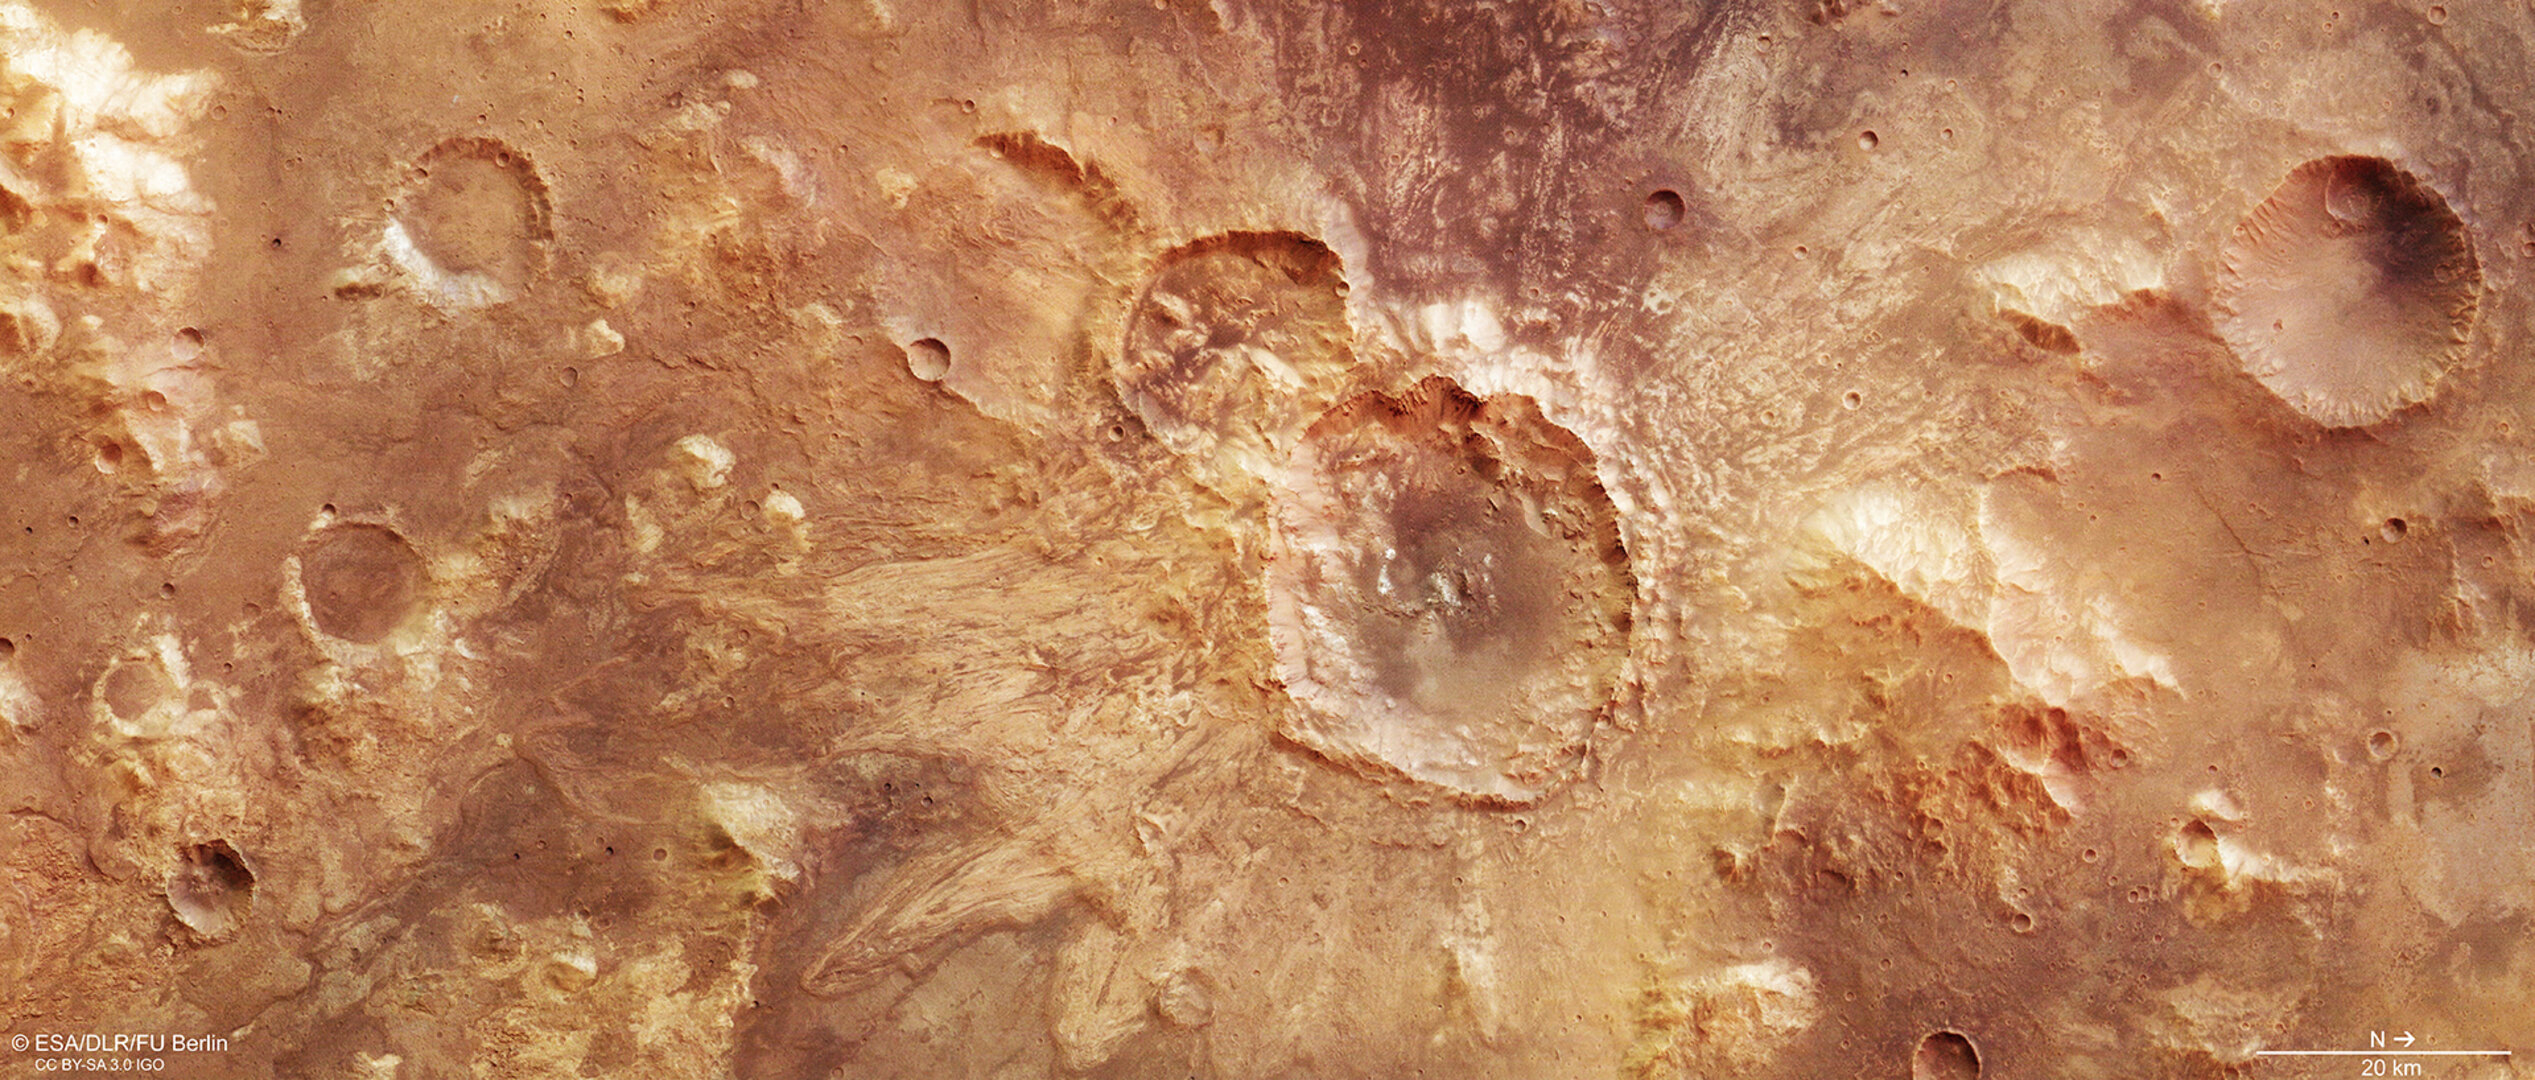 Water-rich impact crater on Mars